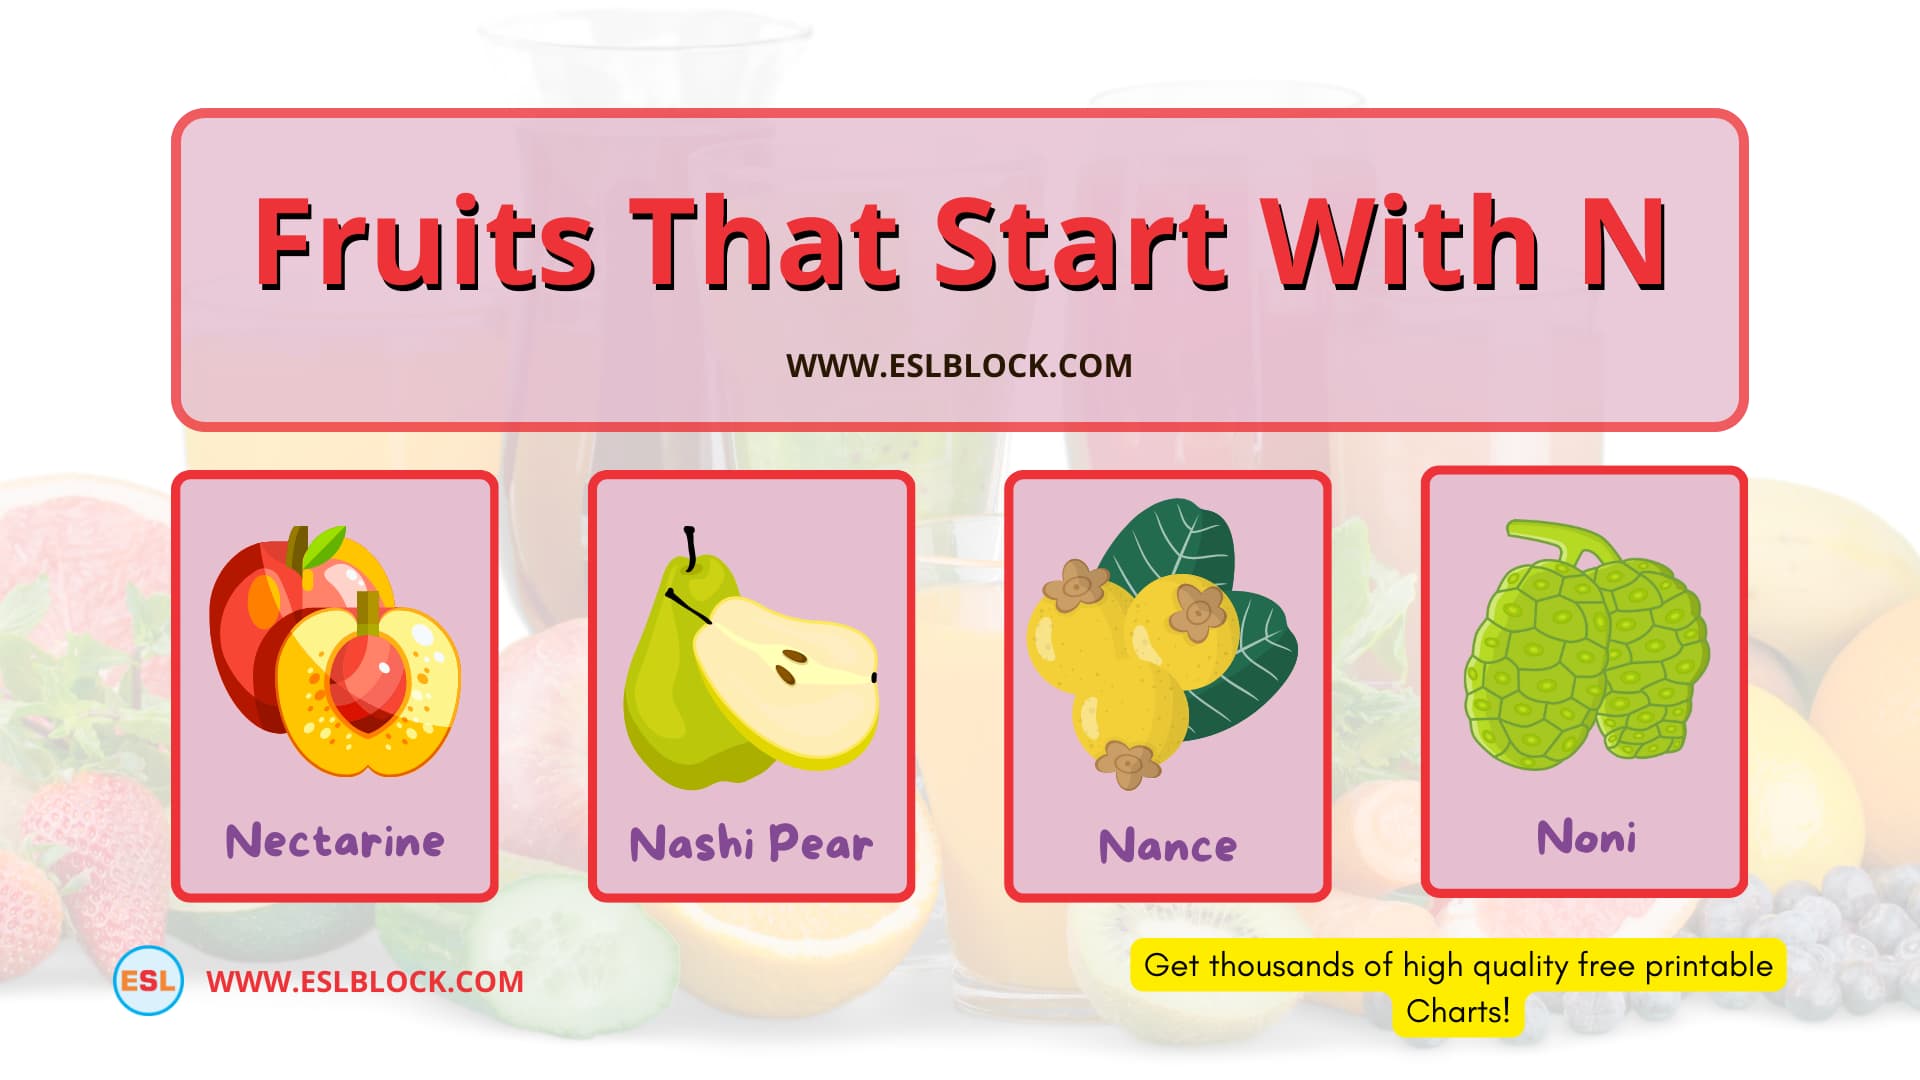 A to Z Fruits Names, Animals, English, English Nouns, English Vocabulary, English Words, Fruits List, Fruits Names, List of Fruits, Nouns, Vocabulary, Fruits that start with N